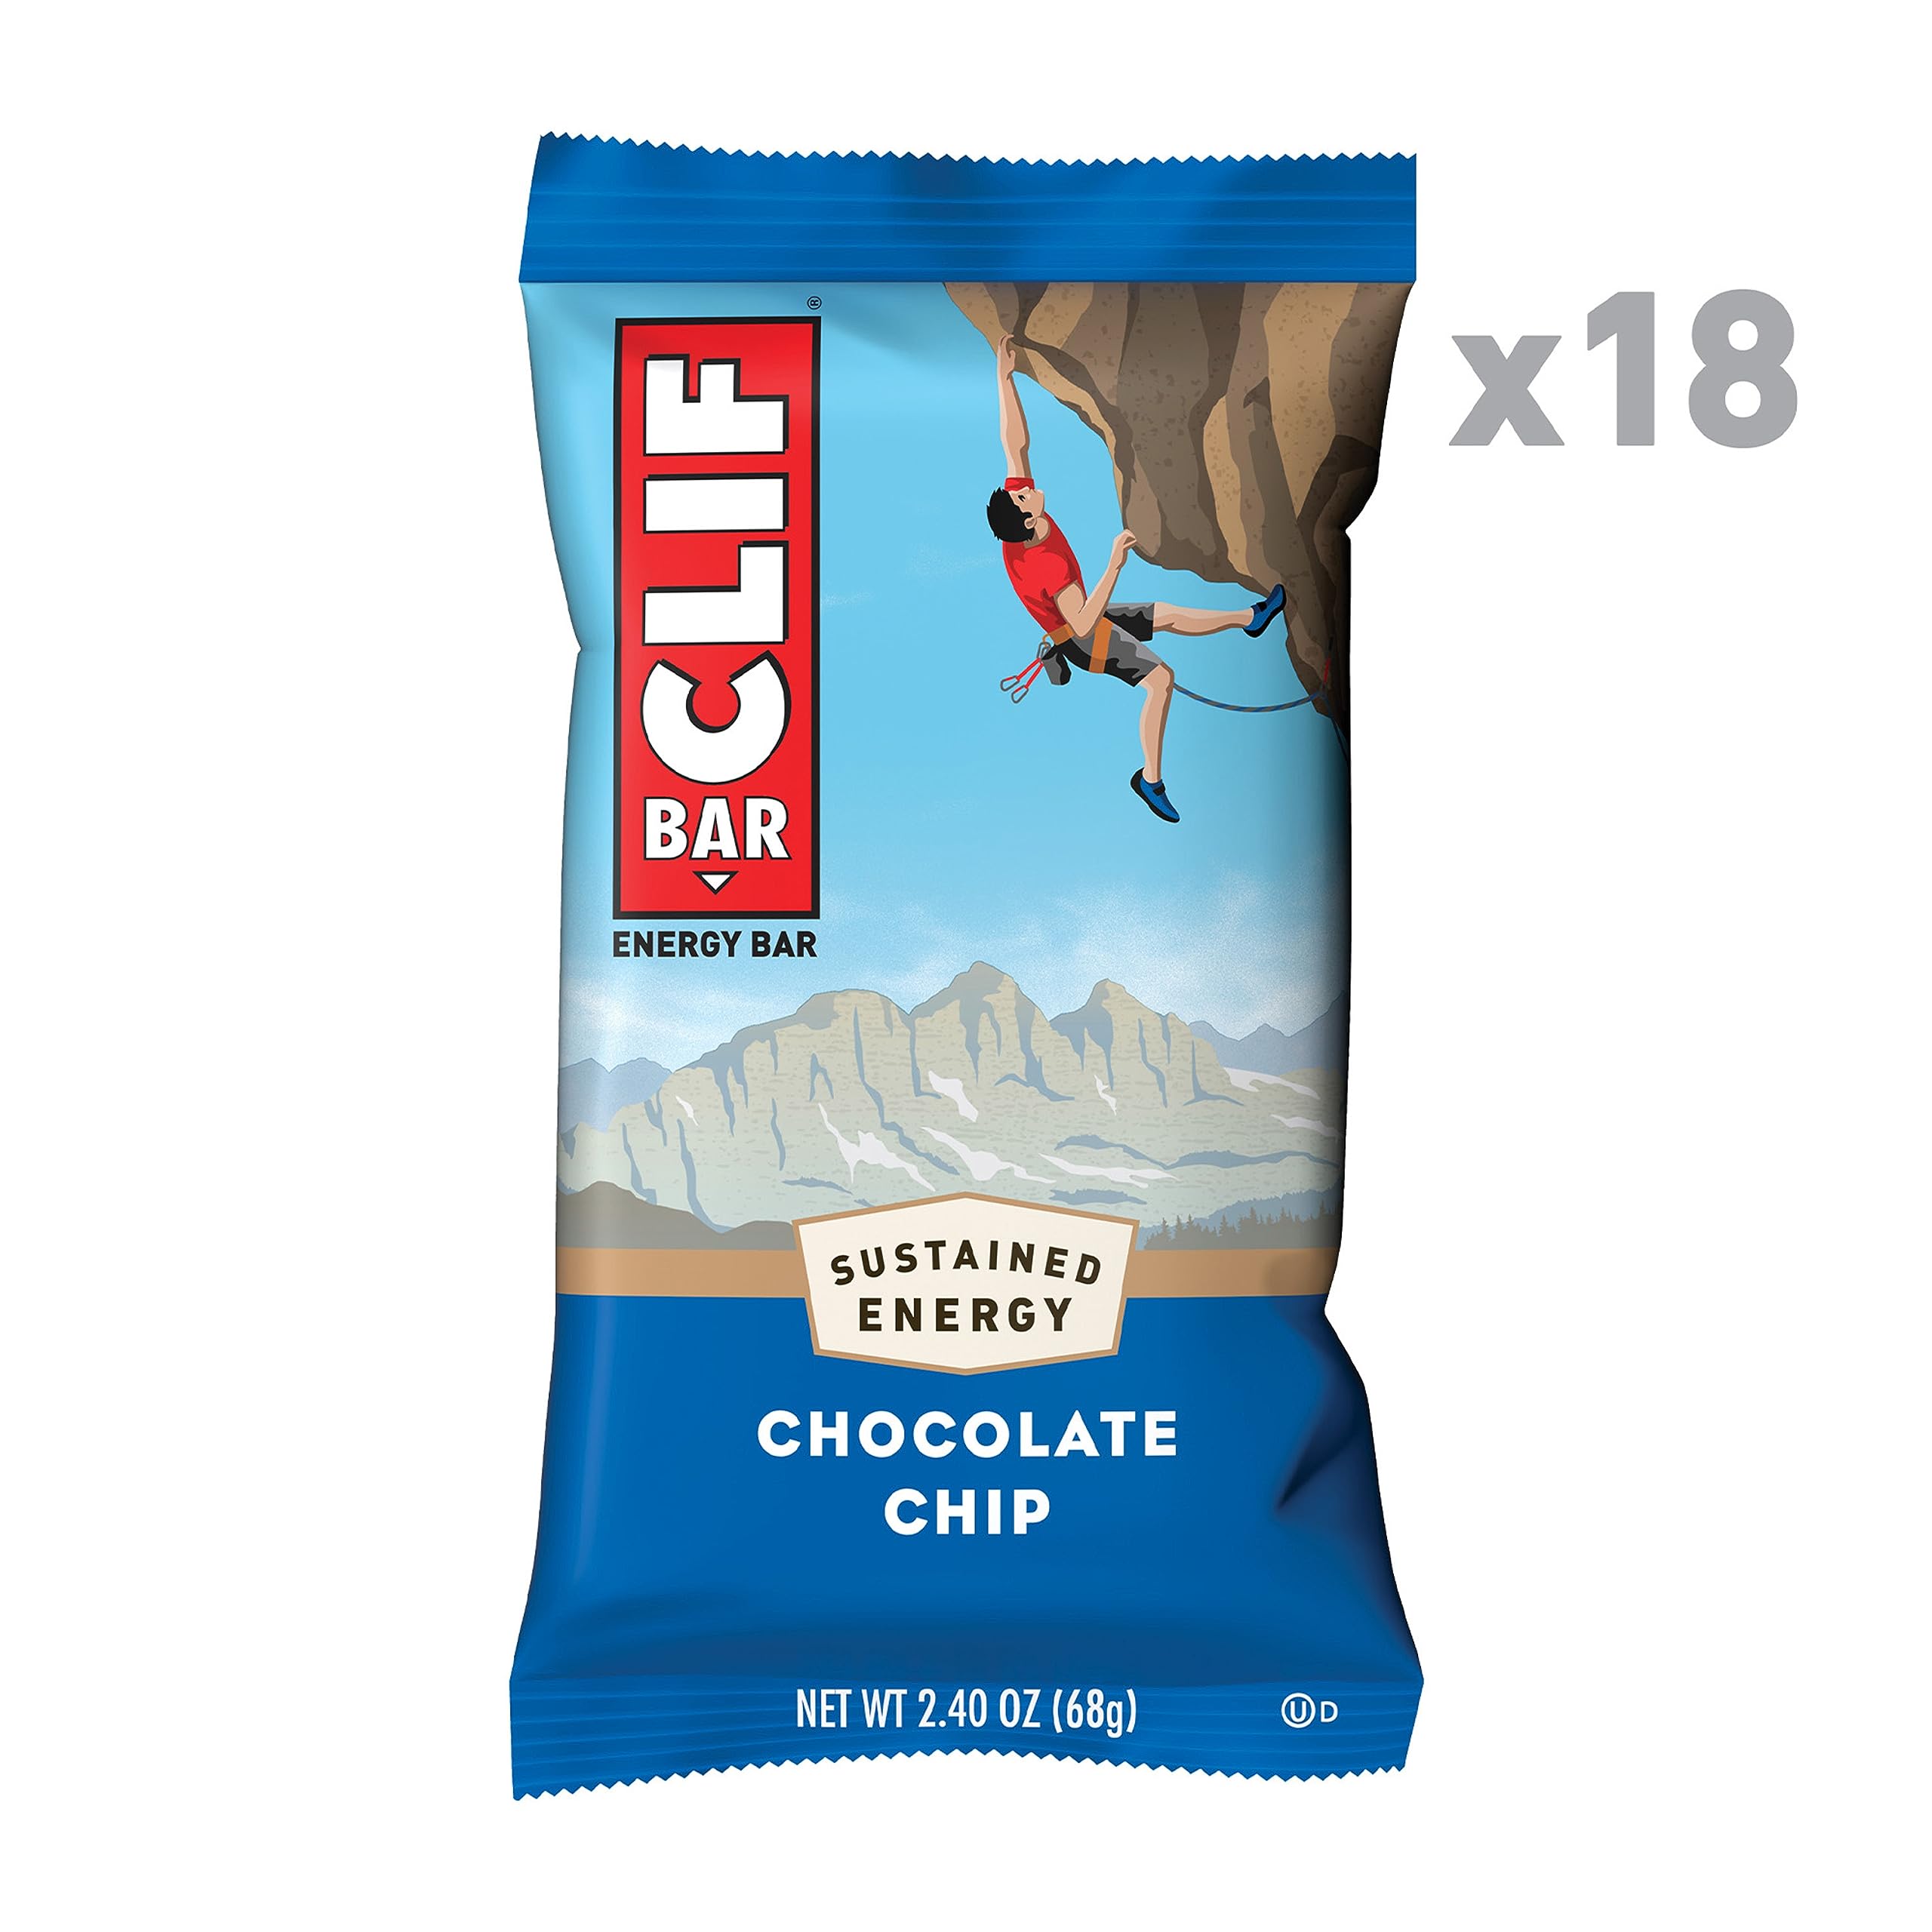 CLIF BAR - Peanut Butter Banana with Dark Chocolate Flavor & - Chocolate Chip - Made with Organic Oats - Non-GMO - Plant Based - Energy Bars - 2.4 oz. (18 Pack)